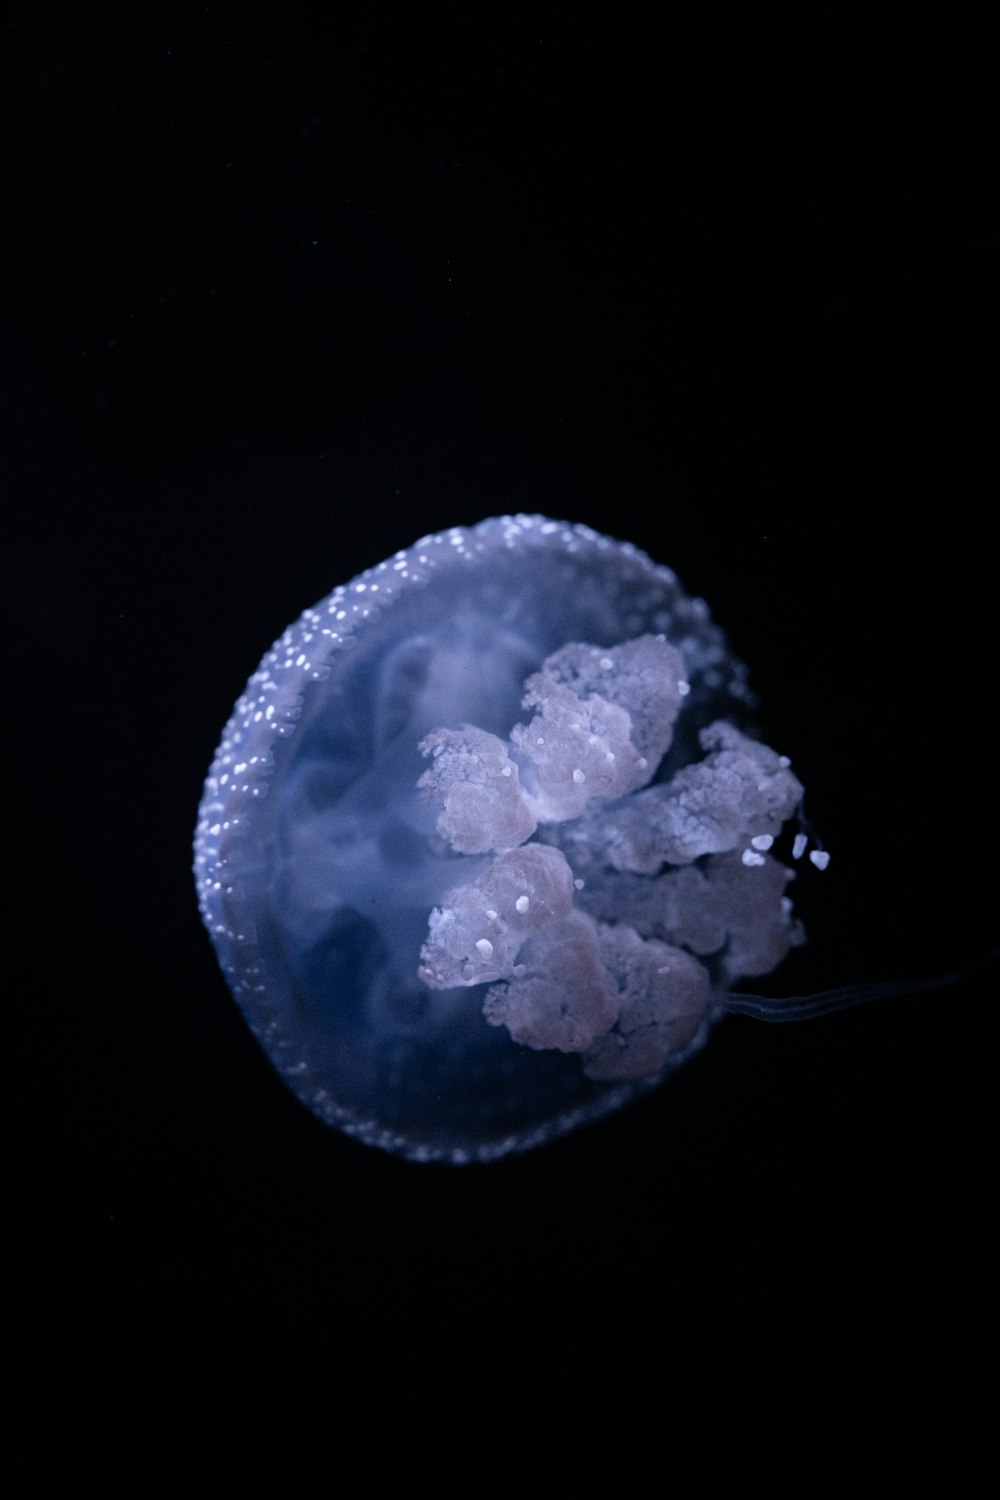 a jellyfish is floating in the dark water